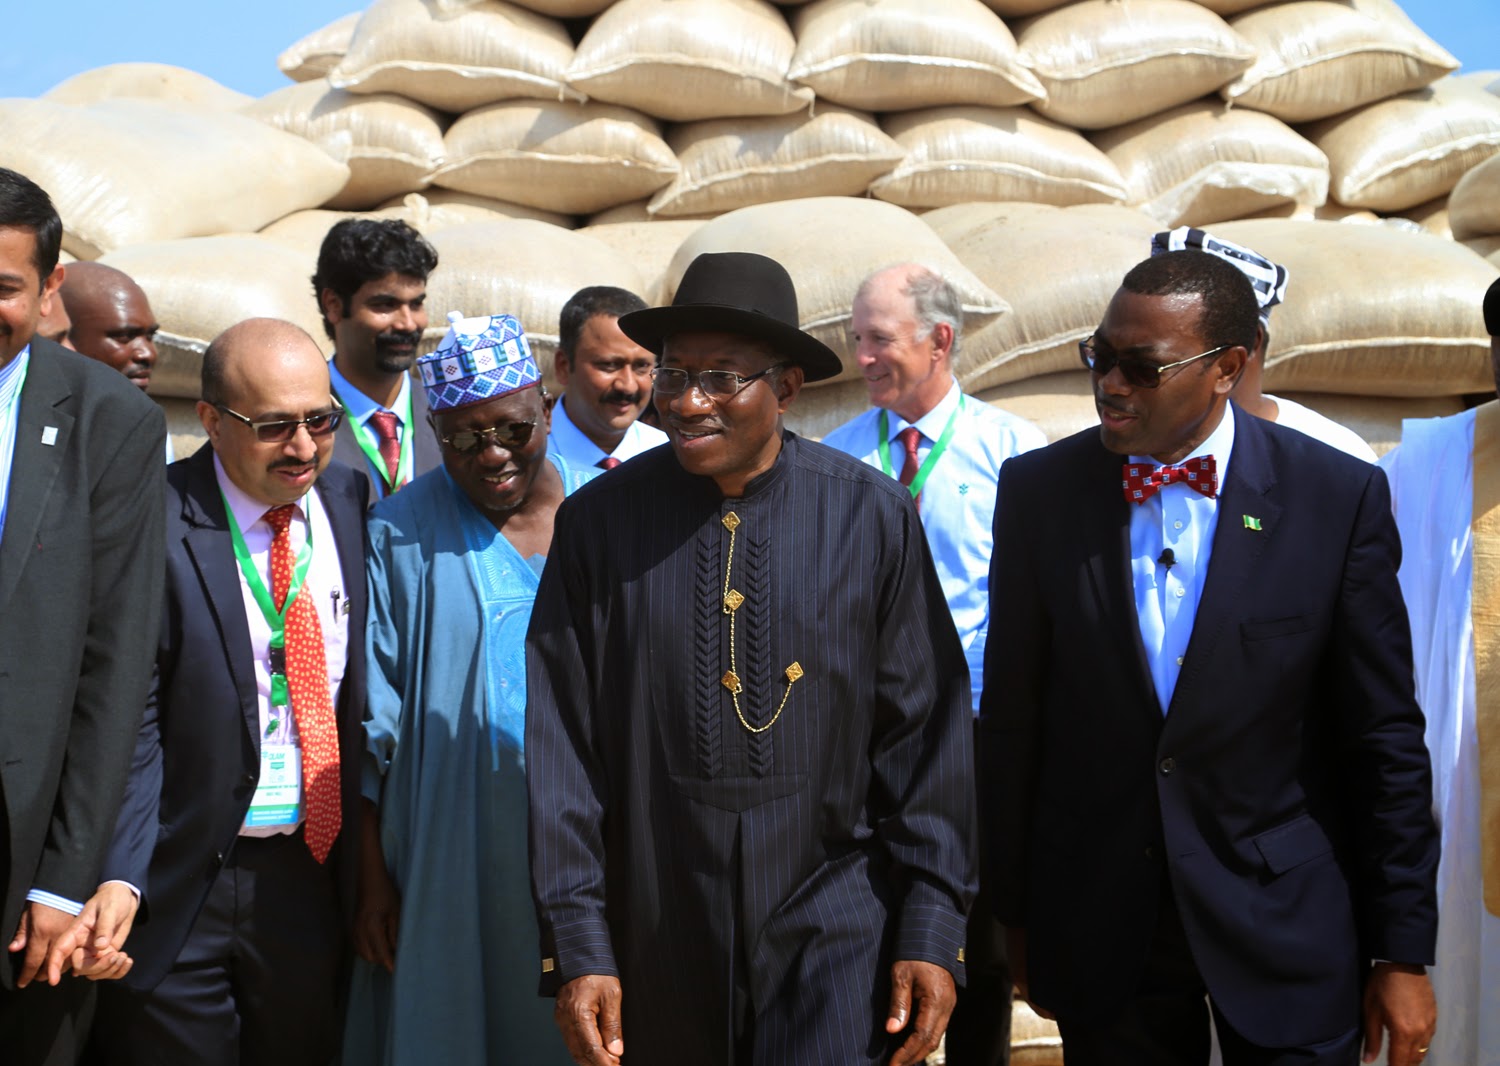 From left Managing Director Olam Rice Nigeria Mr Srivatsan Nasarawa State Governor Tanko Al-Makura President Goodluck Jonathan and Agric Minister Dr Akinwumi Adesina at the commissioning of Olam Rice Farm .Nigeria at Rukubi Nasarawa State on Monday 14th July 2014.